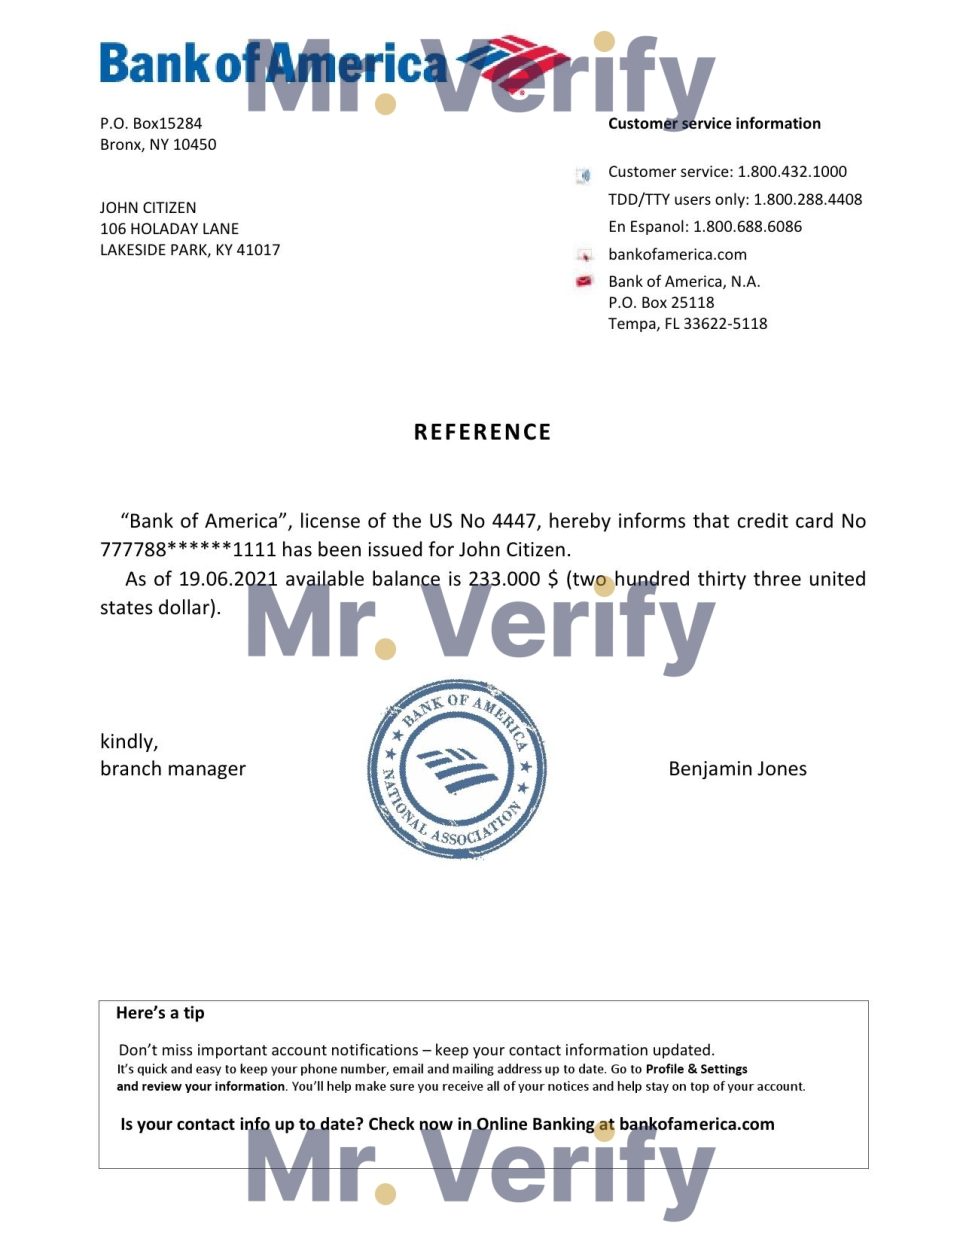 Download USA Bank of America Bank Reference Letter Templates | Editable Word